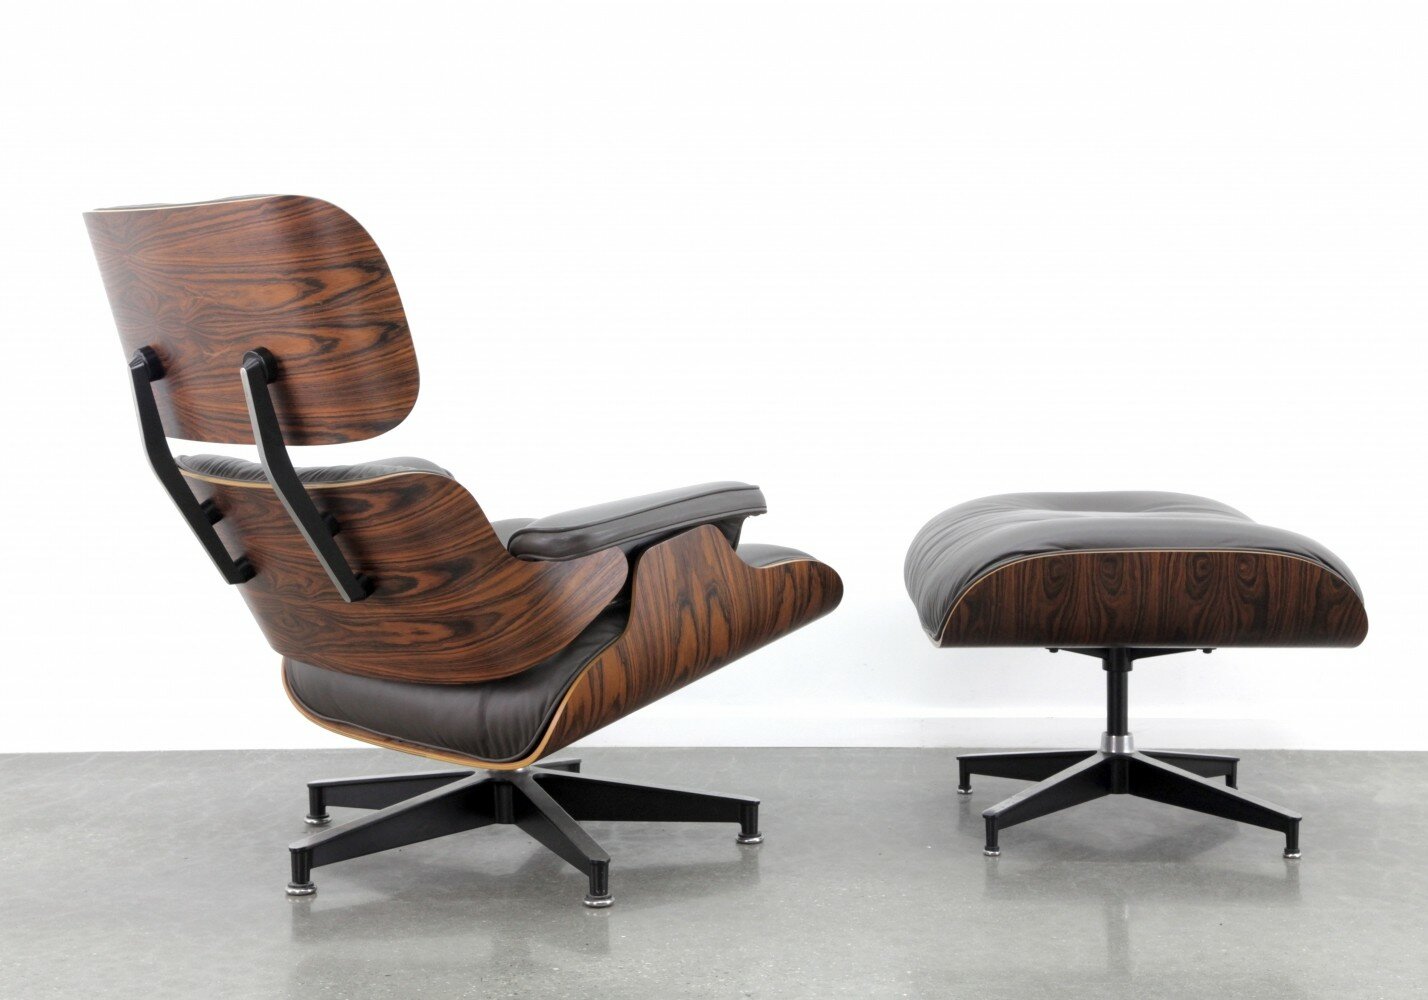 Luxury Furniture Ideas with Eames Lounge Chair and Ottoman: Eames Lounge Chair And Ottoman | Used Eames Lounge Chair And Ottoman | Ottoman Lounge Chair